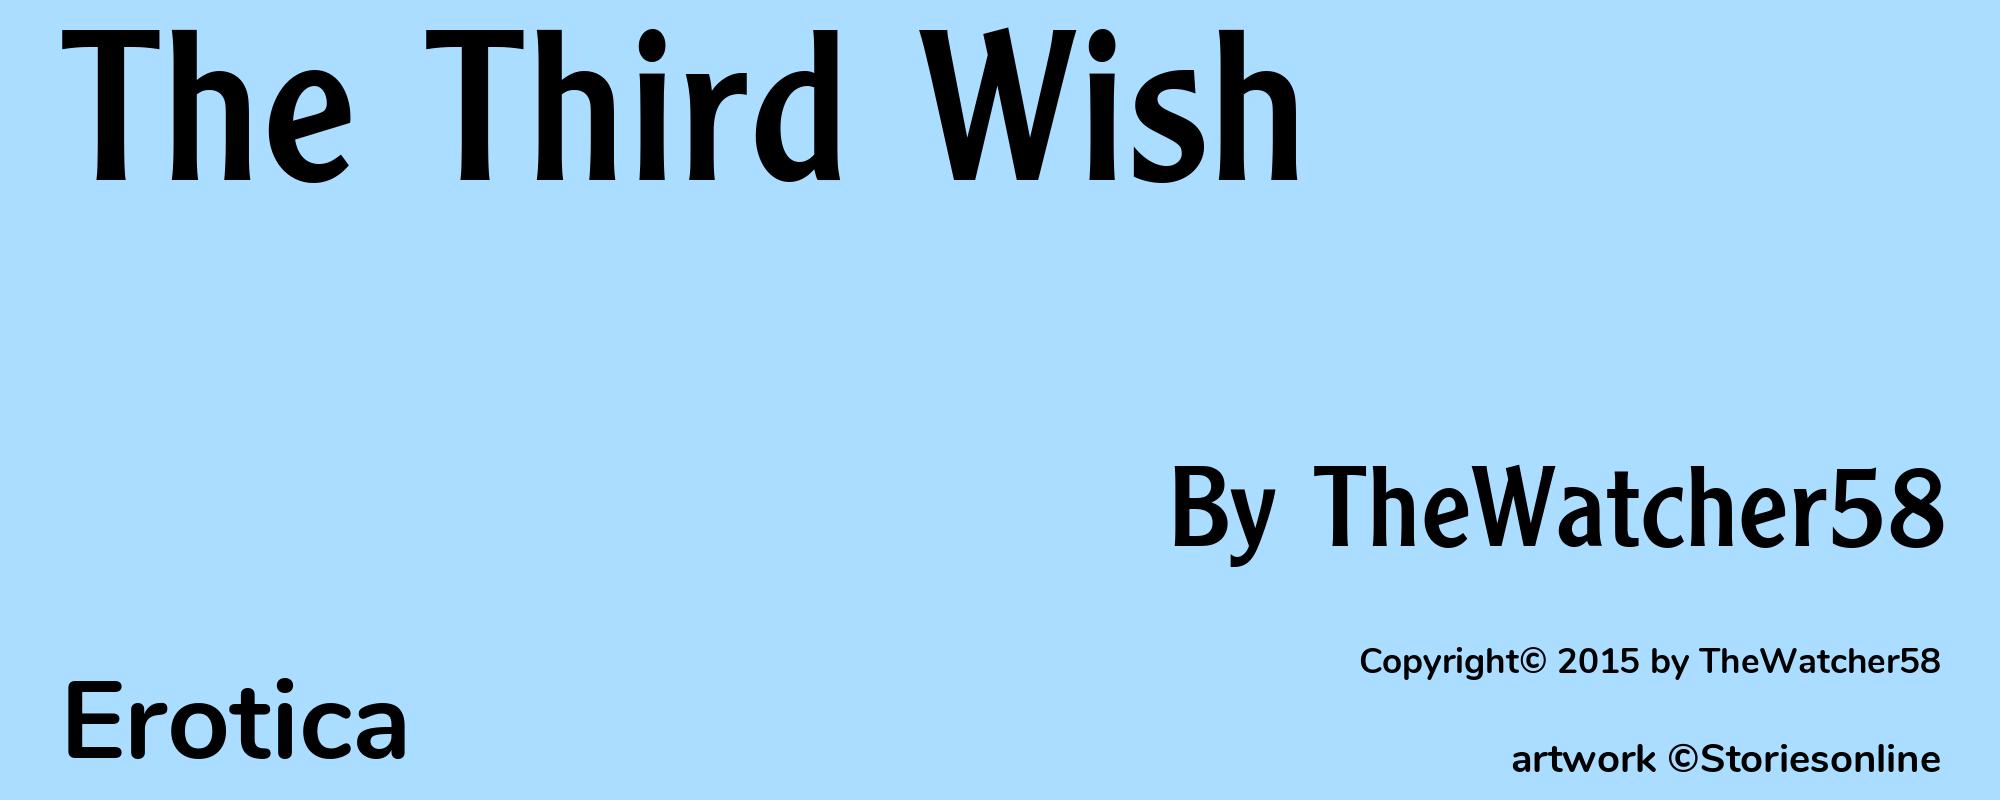 The Third Wish - Cover